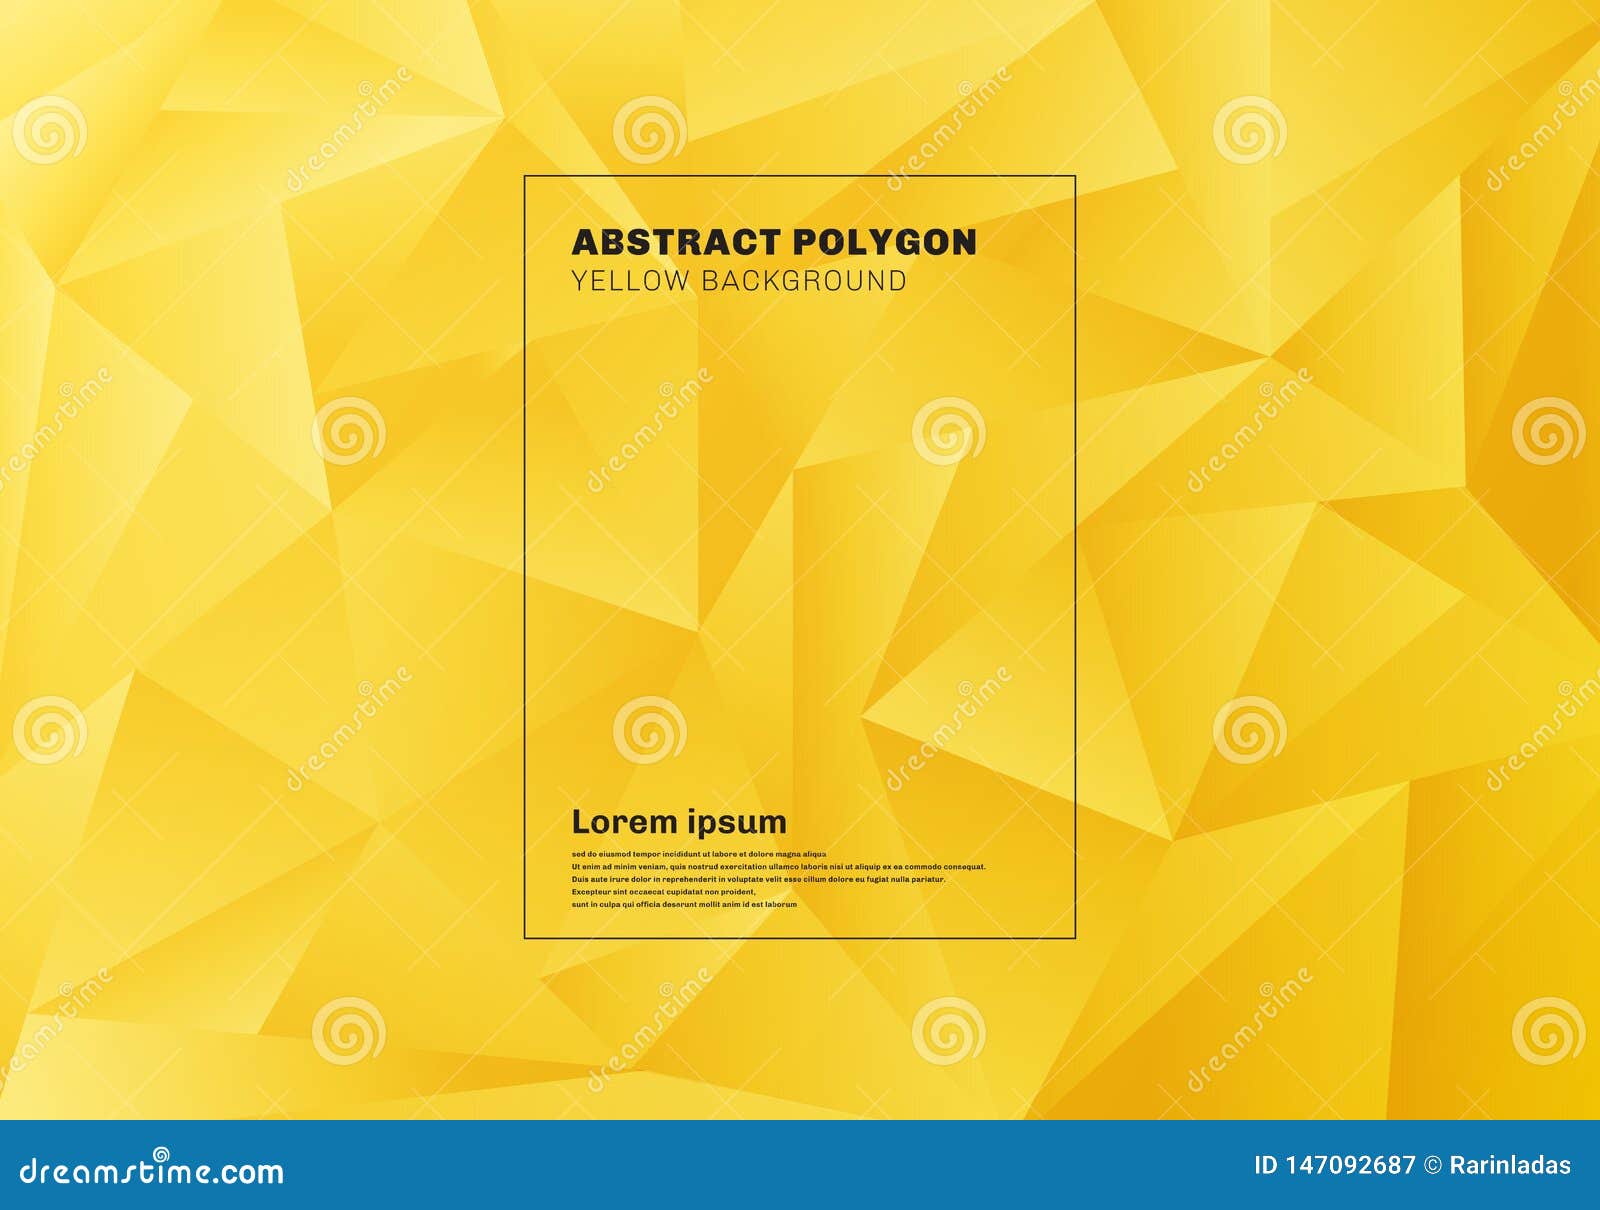 Premium Vector  A dark blue and white geometric pattern with a yellow  center.